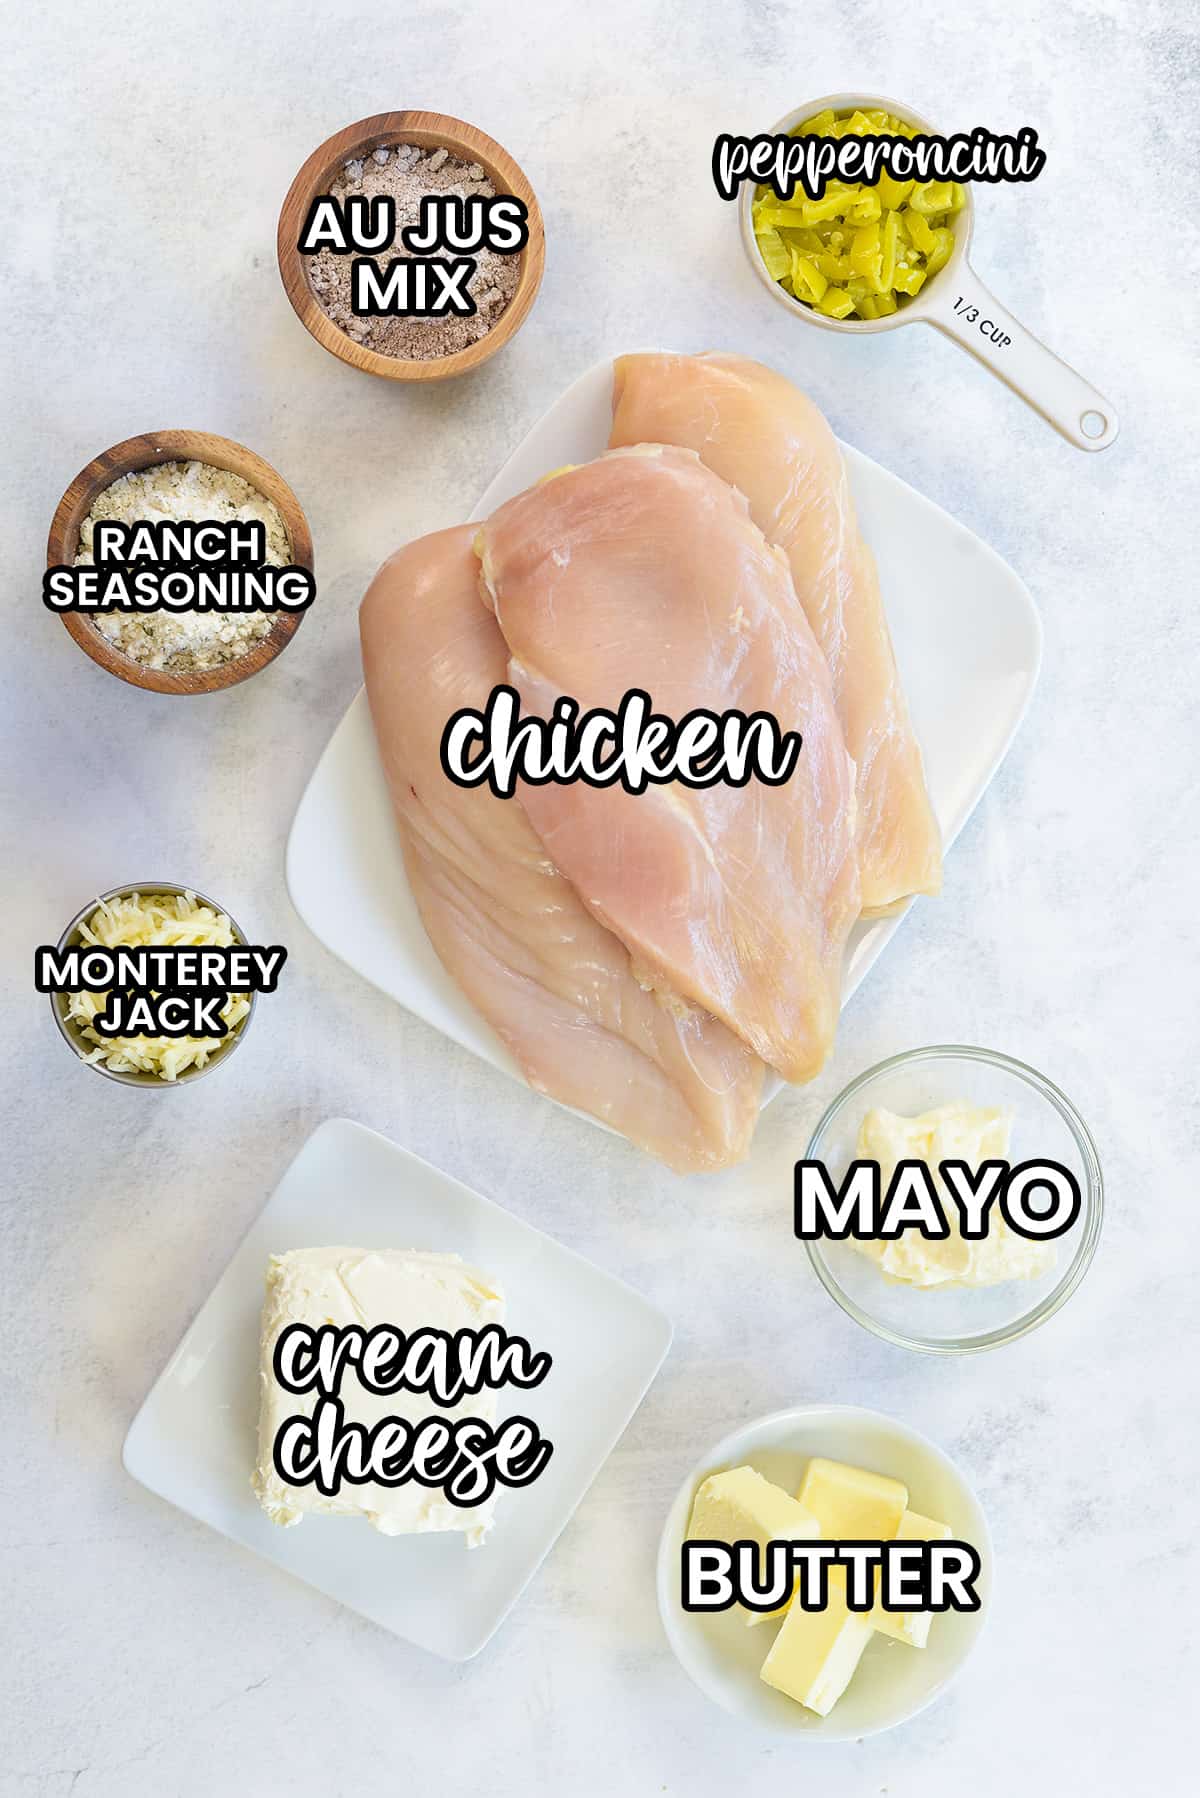 ingredients for mississippi stuffed chicken.